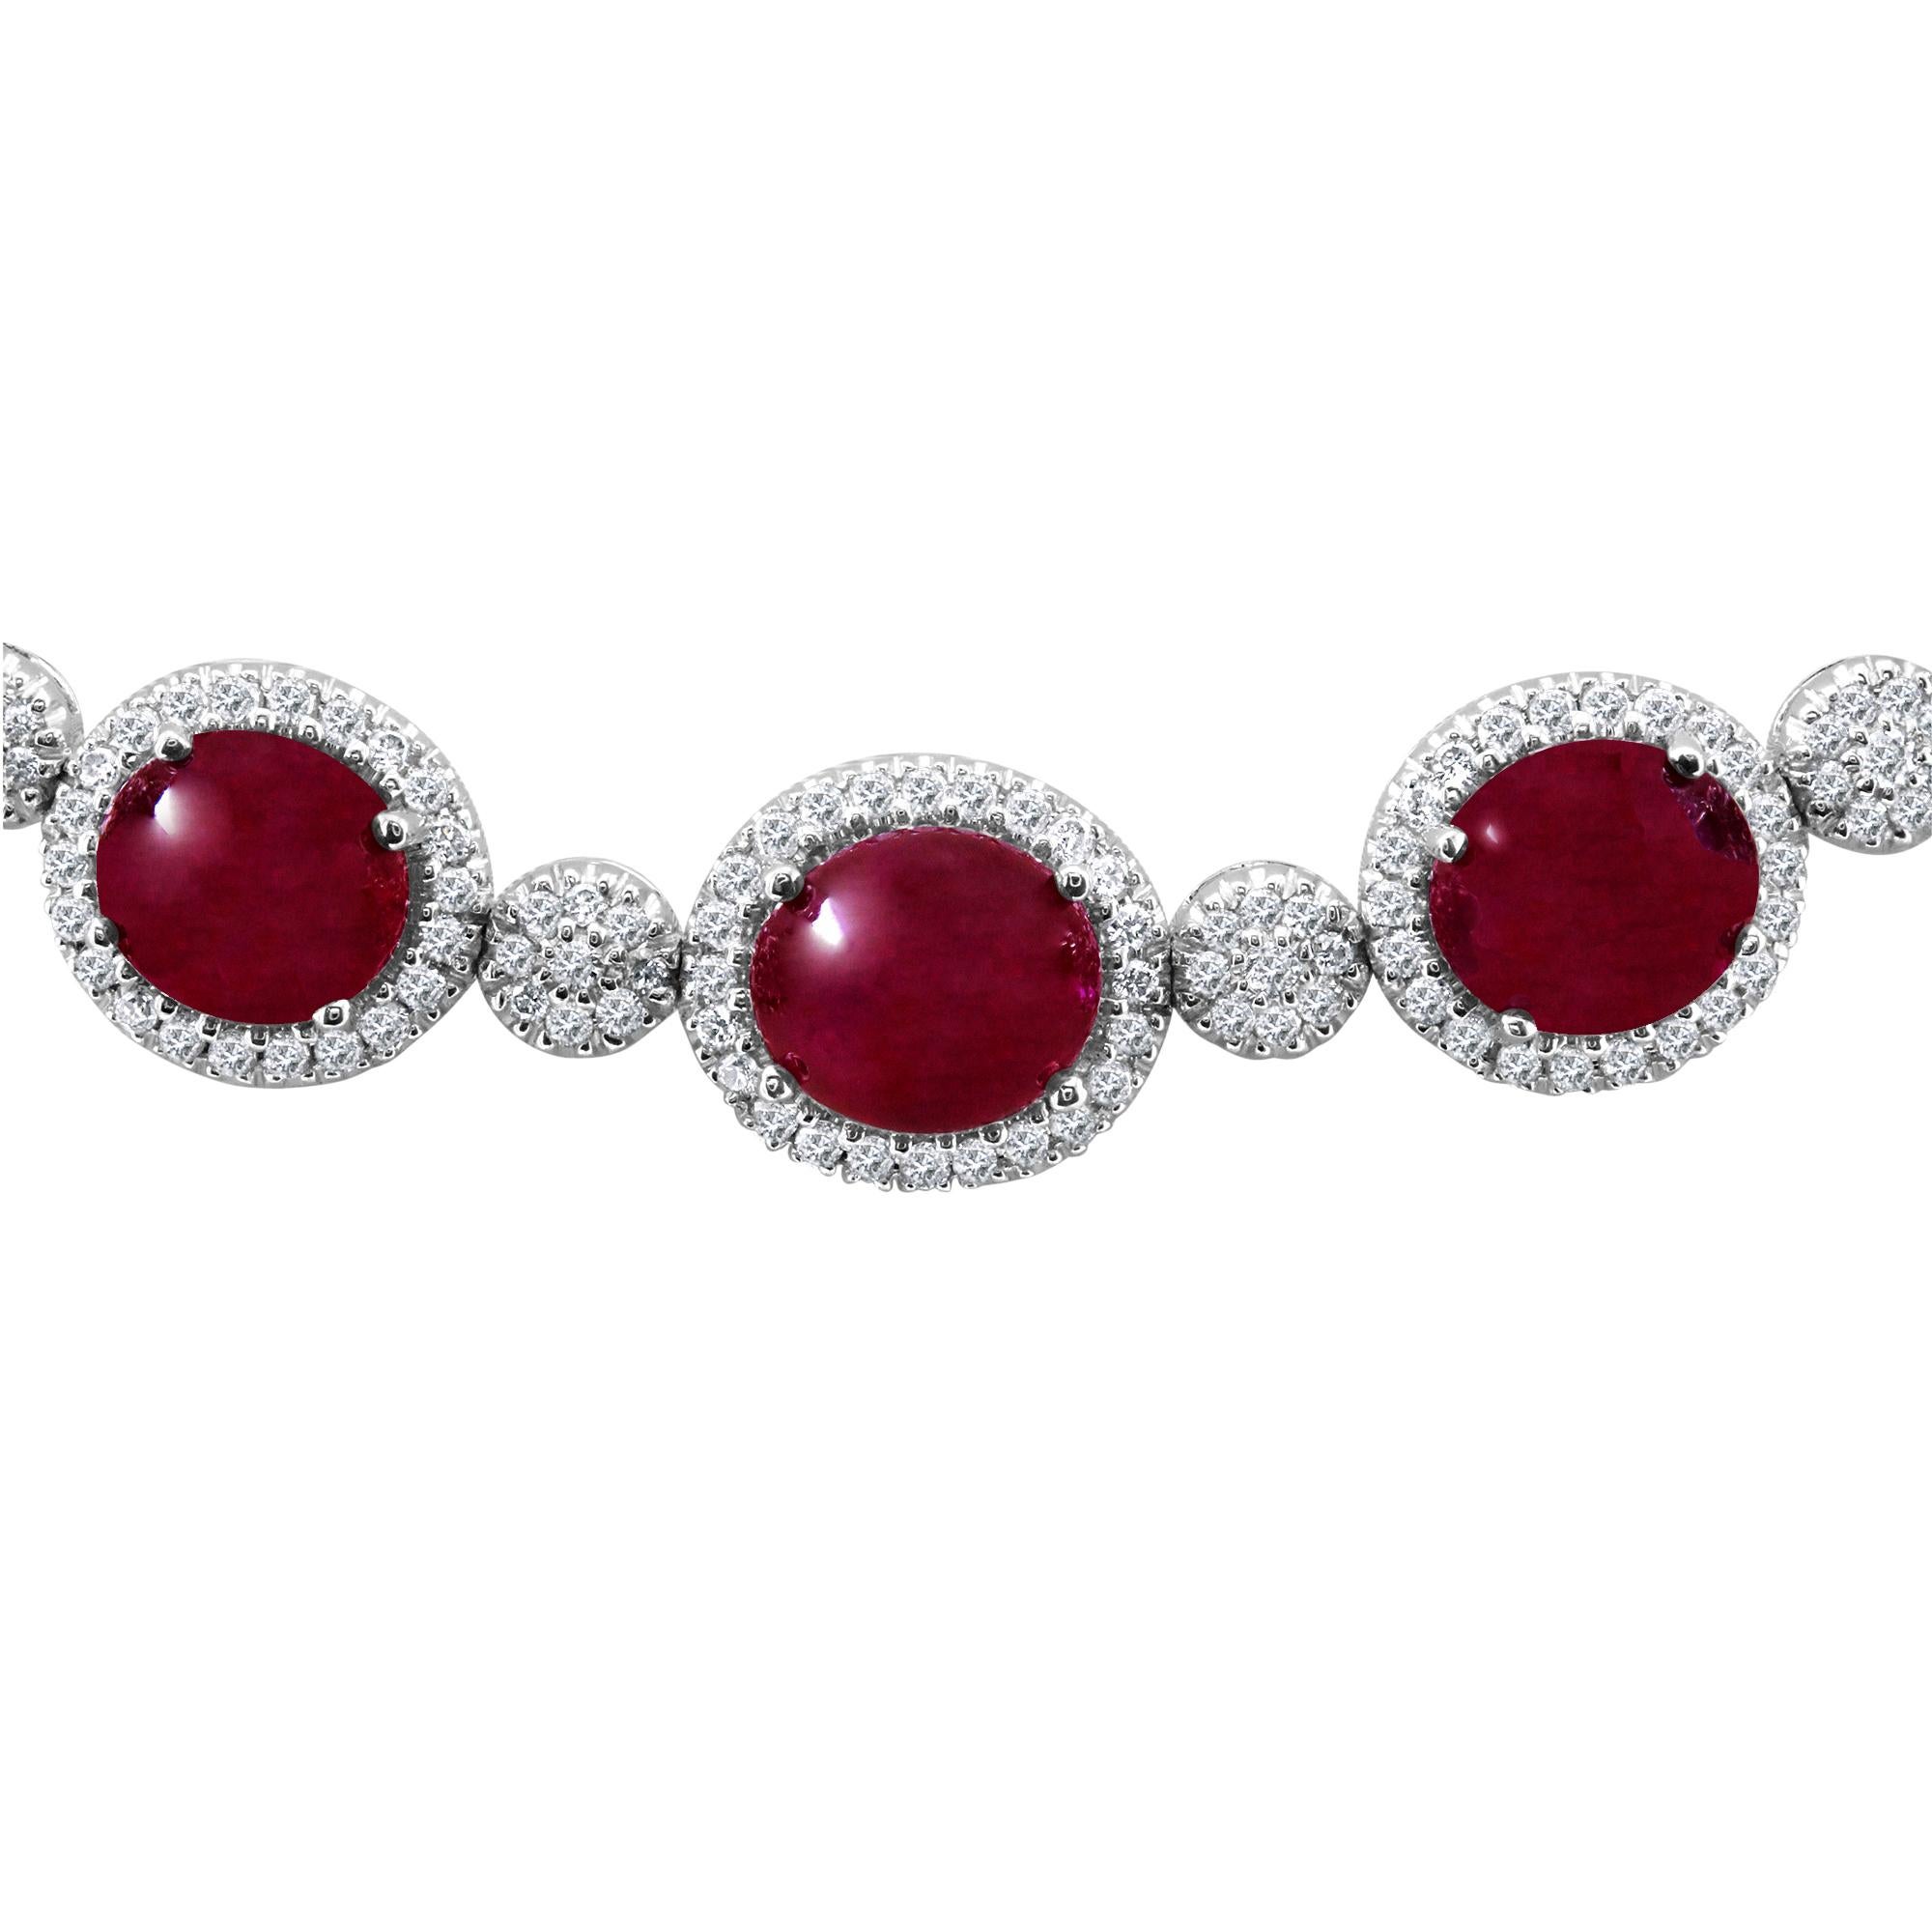 13.79 carat Cabochon Rubies, with diamond halo, alternating with round diamonds, 1.44 carat total diamond weight.

Clasp: Tongue in box clasp with safety latch. 

Length: 16 3/4